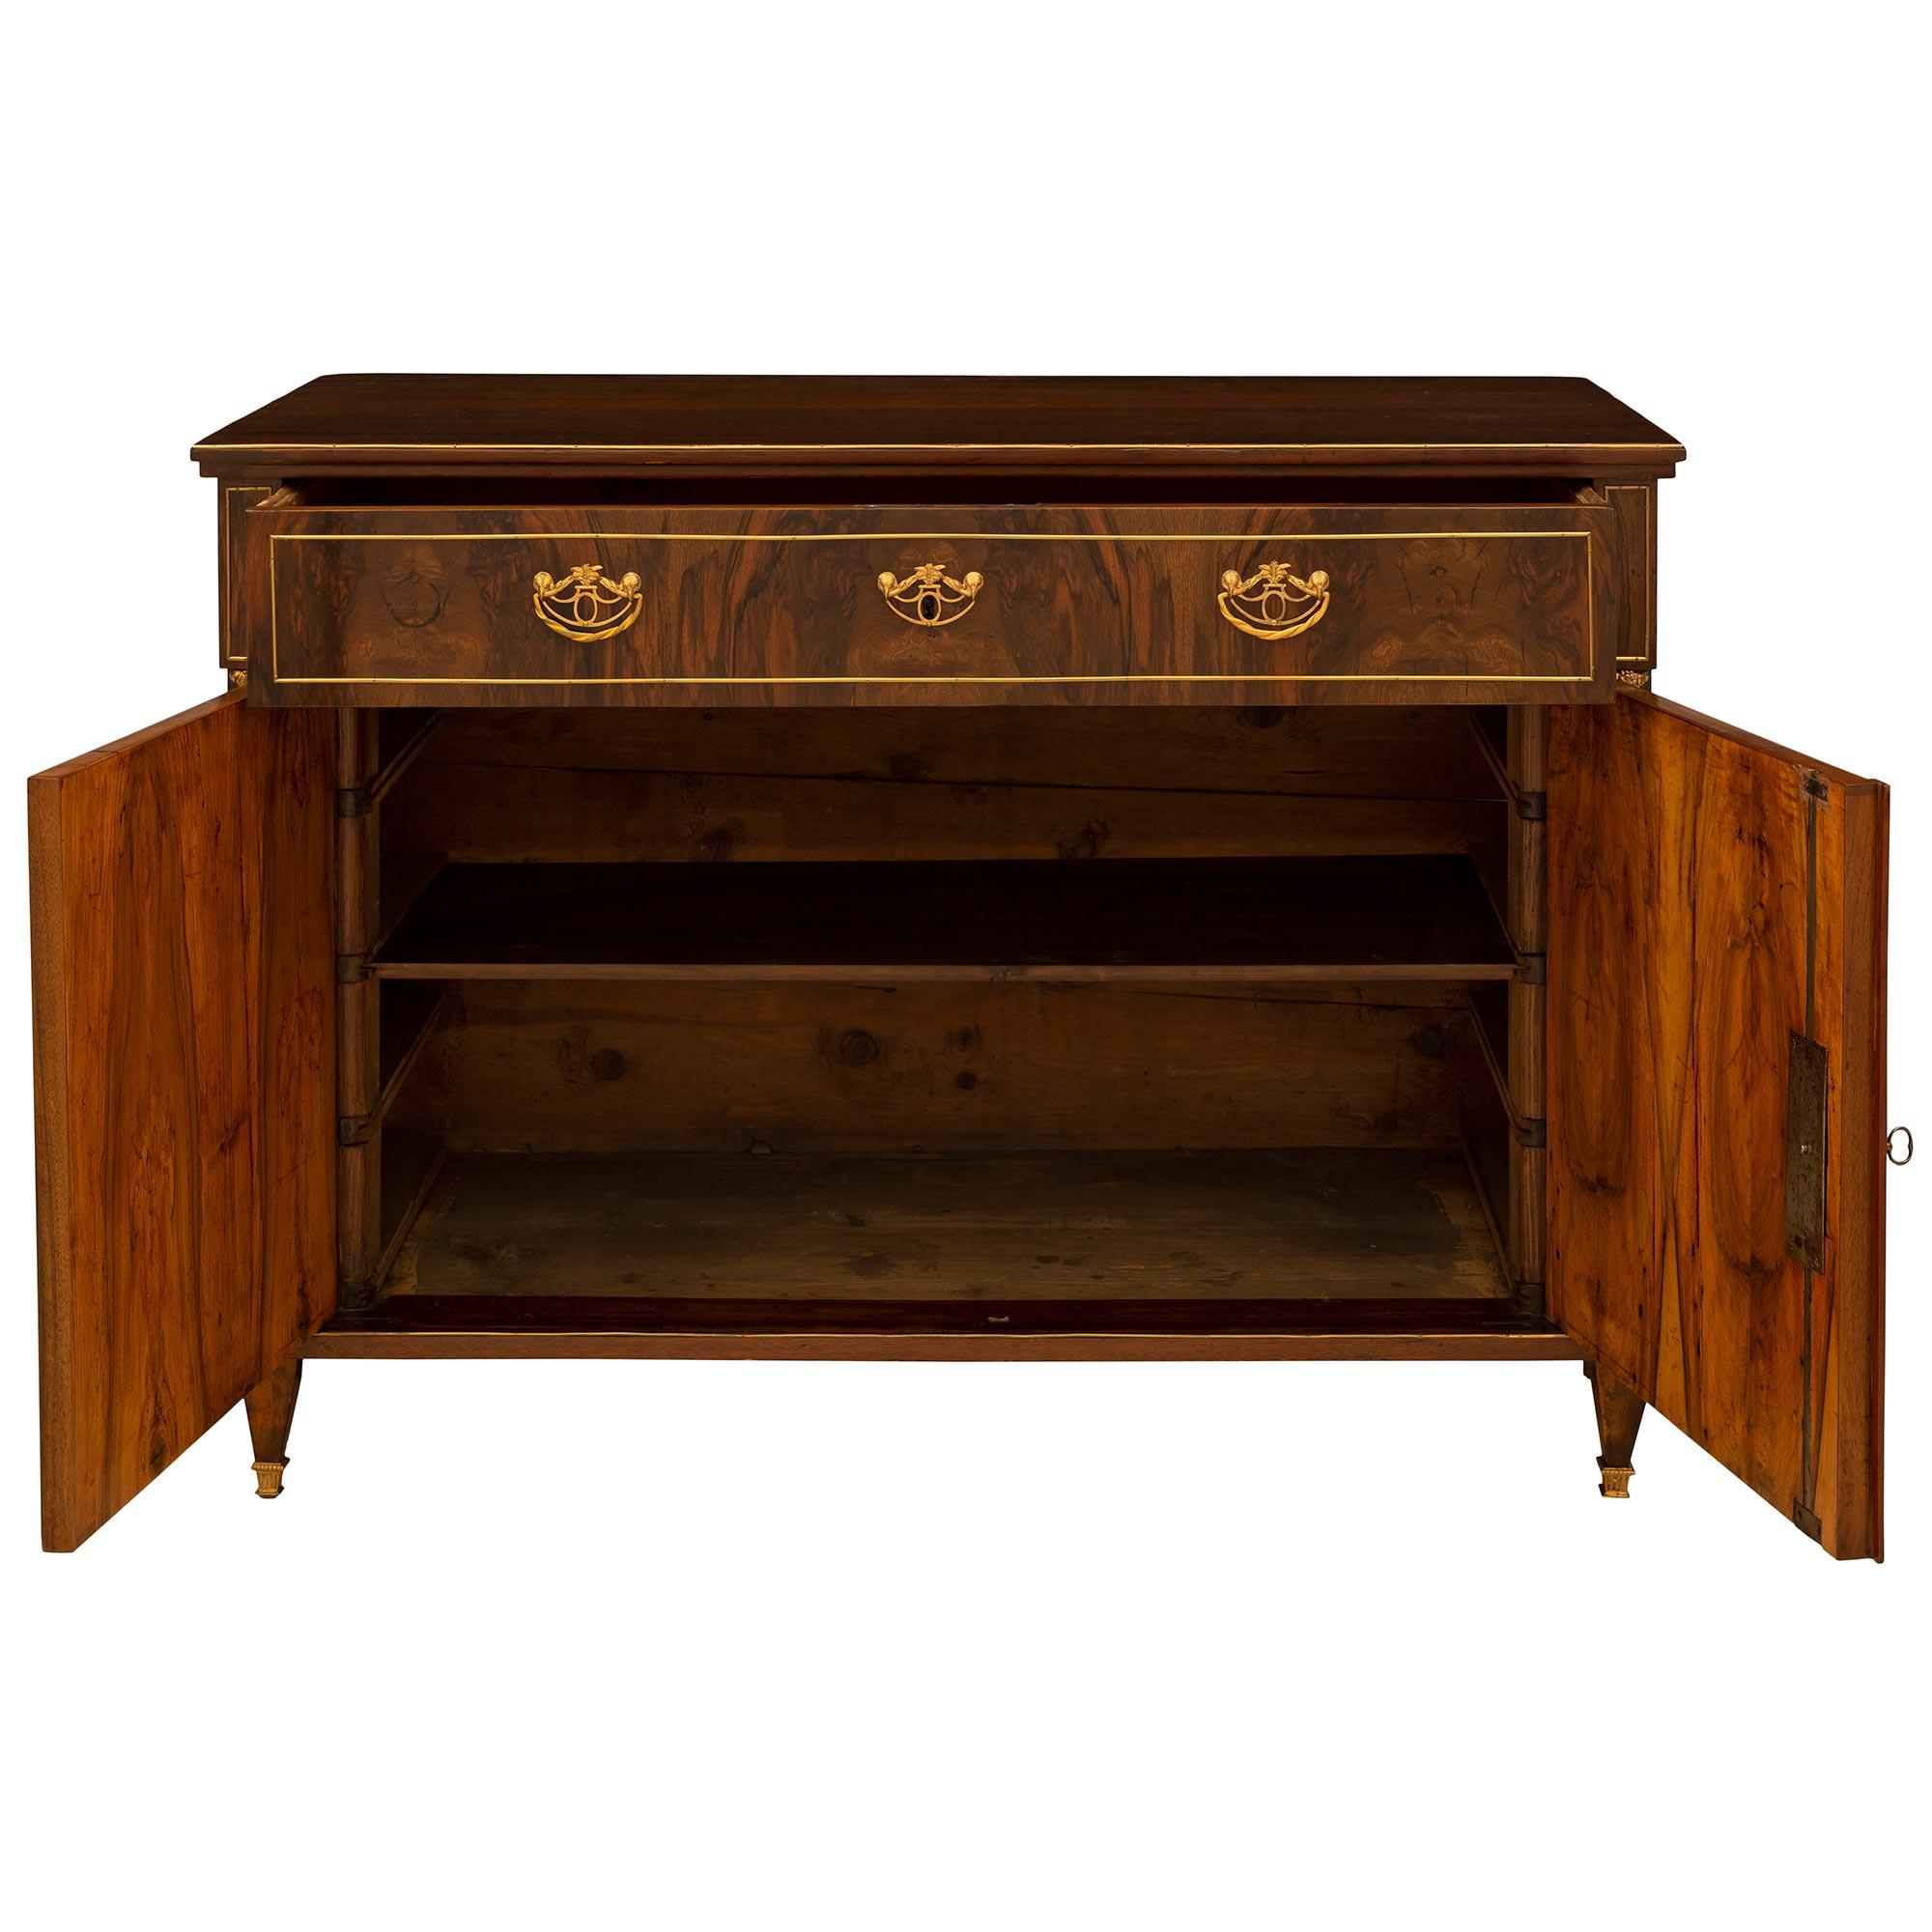 A very handsome Baltic-Continental mid-19th century neoclassical style walnut commode. The two-door and one-drawer commode is raised by square tapered legs ending with square ormolu sabots. The straight frieze is below two doors with ormolu keyhole